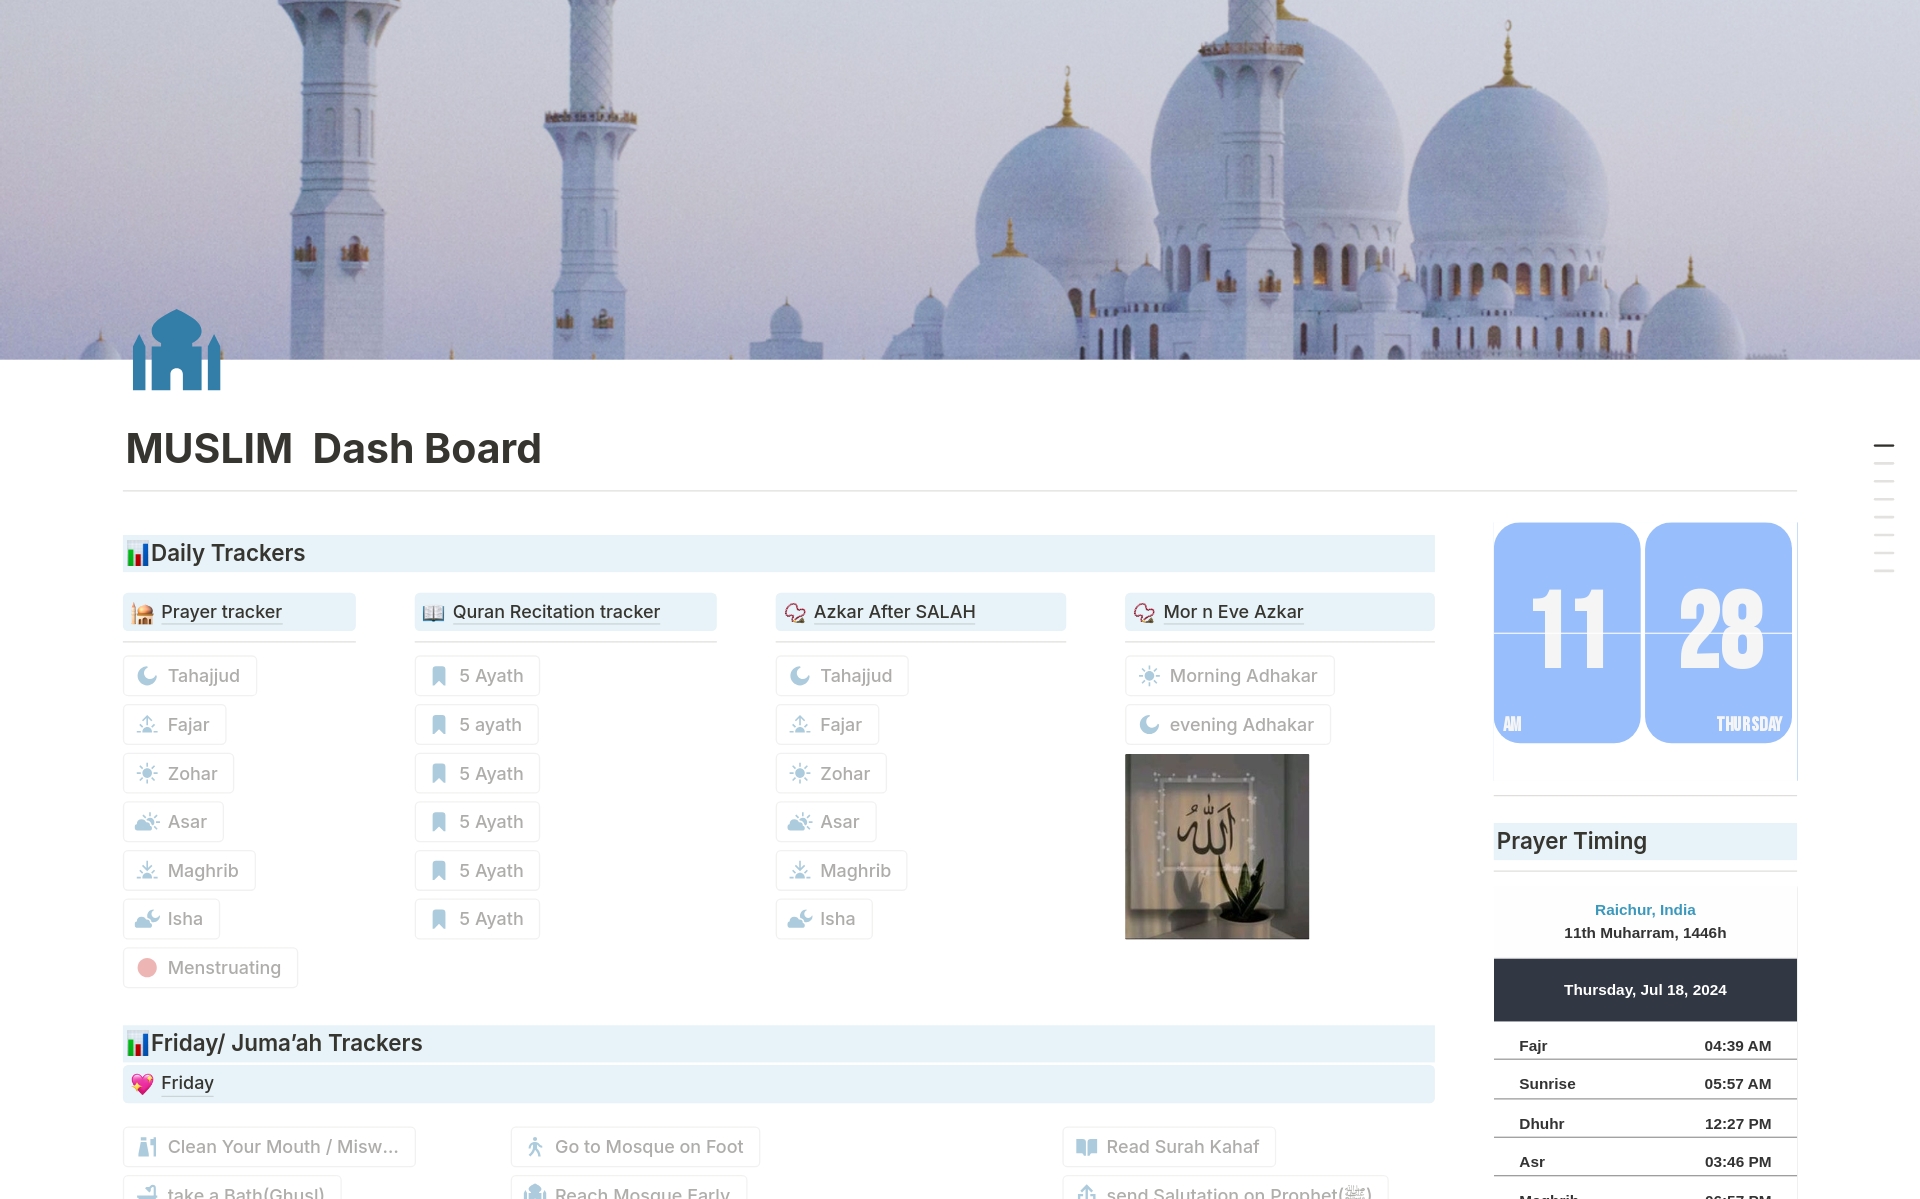 The "Notion Templet: MUSLIM DASHBOARD" about a productive Muslim includes:
	1. Prayer Timings: 
	2. Islamic Calendar: 
	3. Daily Trackers: 
	4. Friday Tracker:
	5. Islamic Classes: 
	6. Islamic Goals:
This structure aims to foster spiritual growth and productivity.